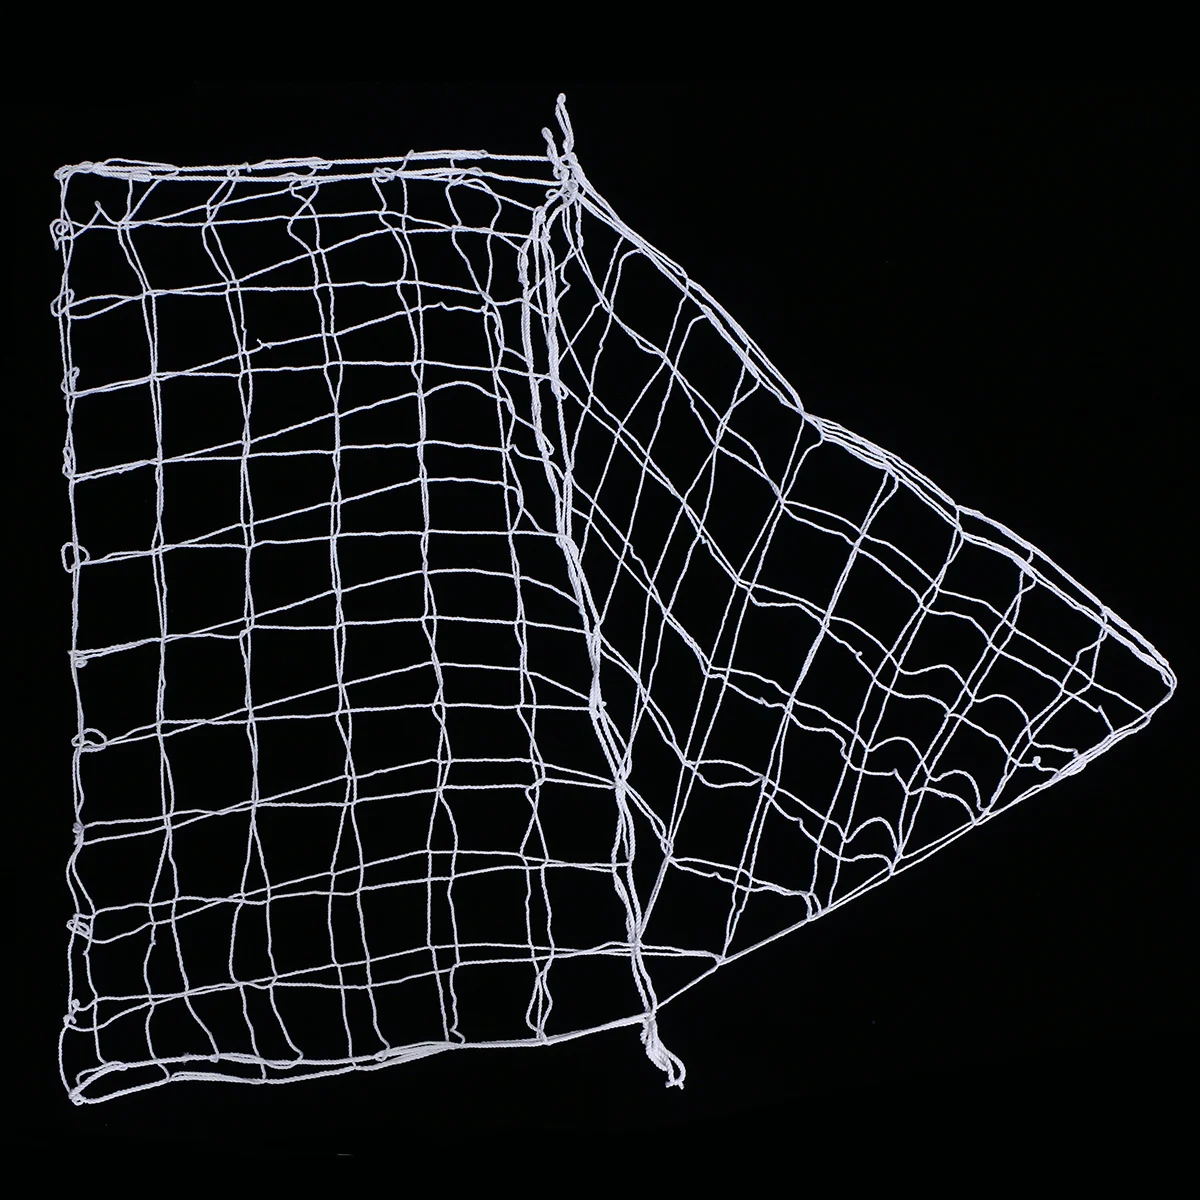 

1PC Multi-functional Strong Practical Durable Polypropylene Soccer Net Football Net Sports Training Tools for Soccer Football